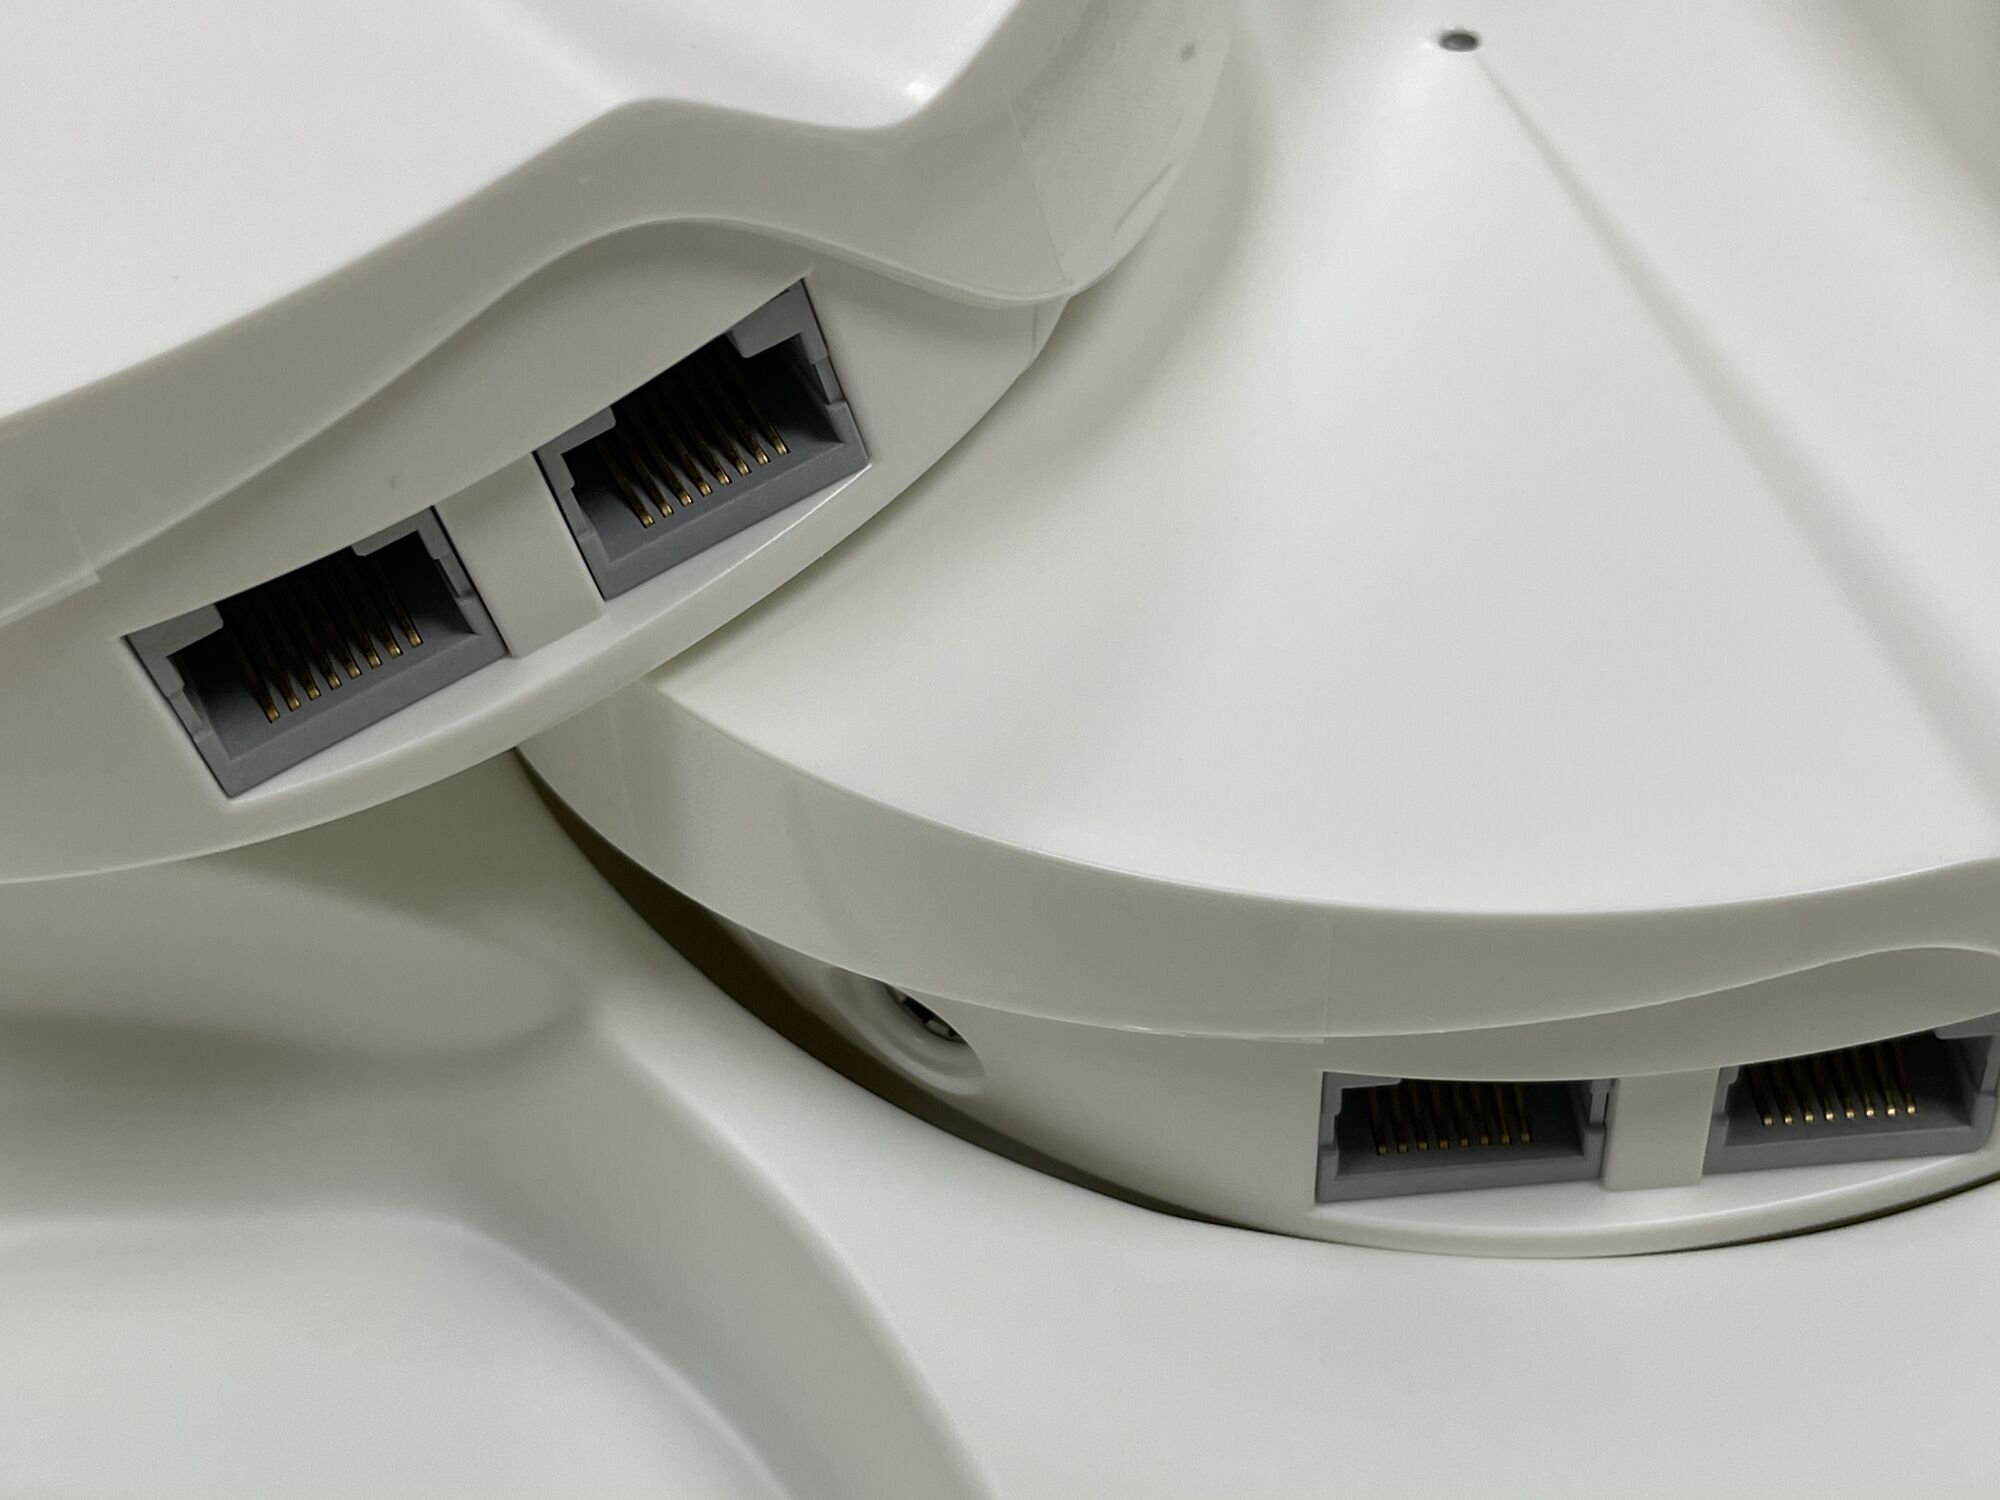 Each TP-Link Deco M5 has two Gigabit ports that can be either WAN or LAN